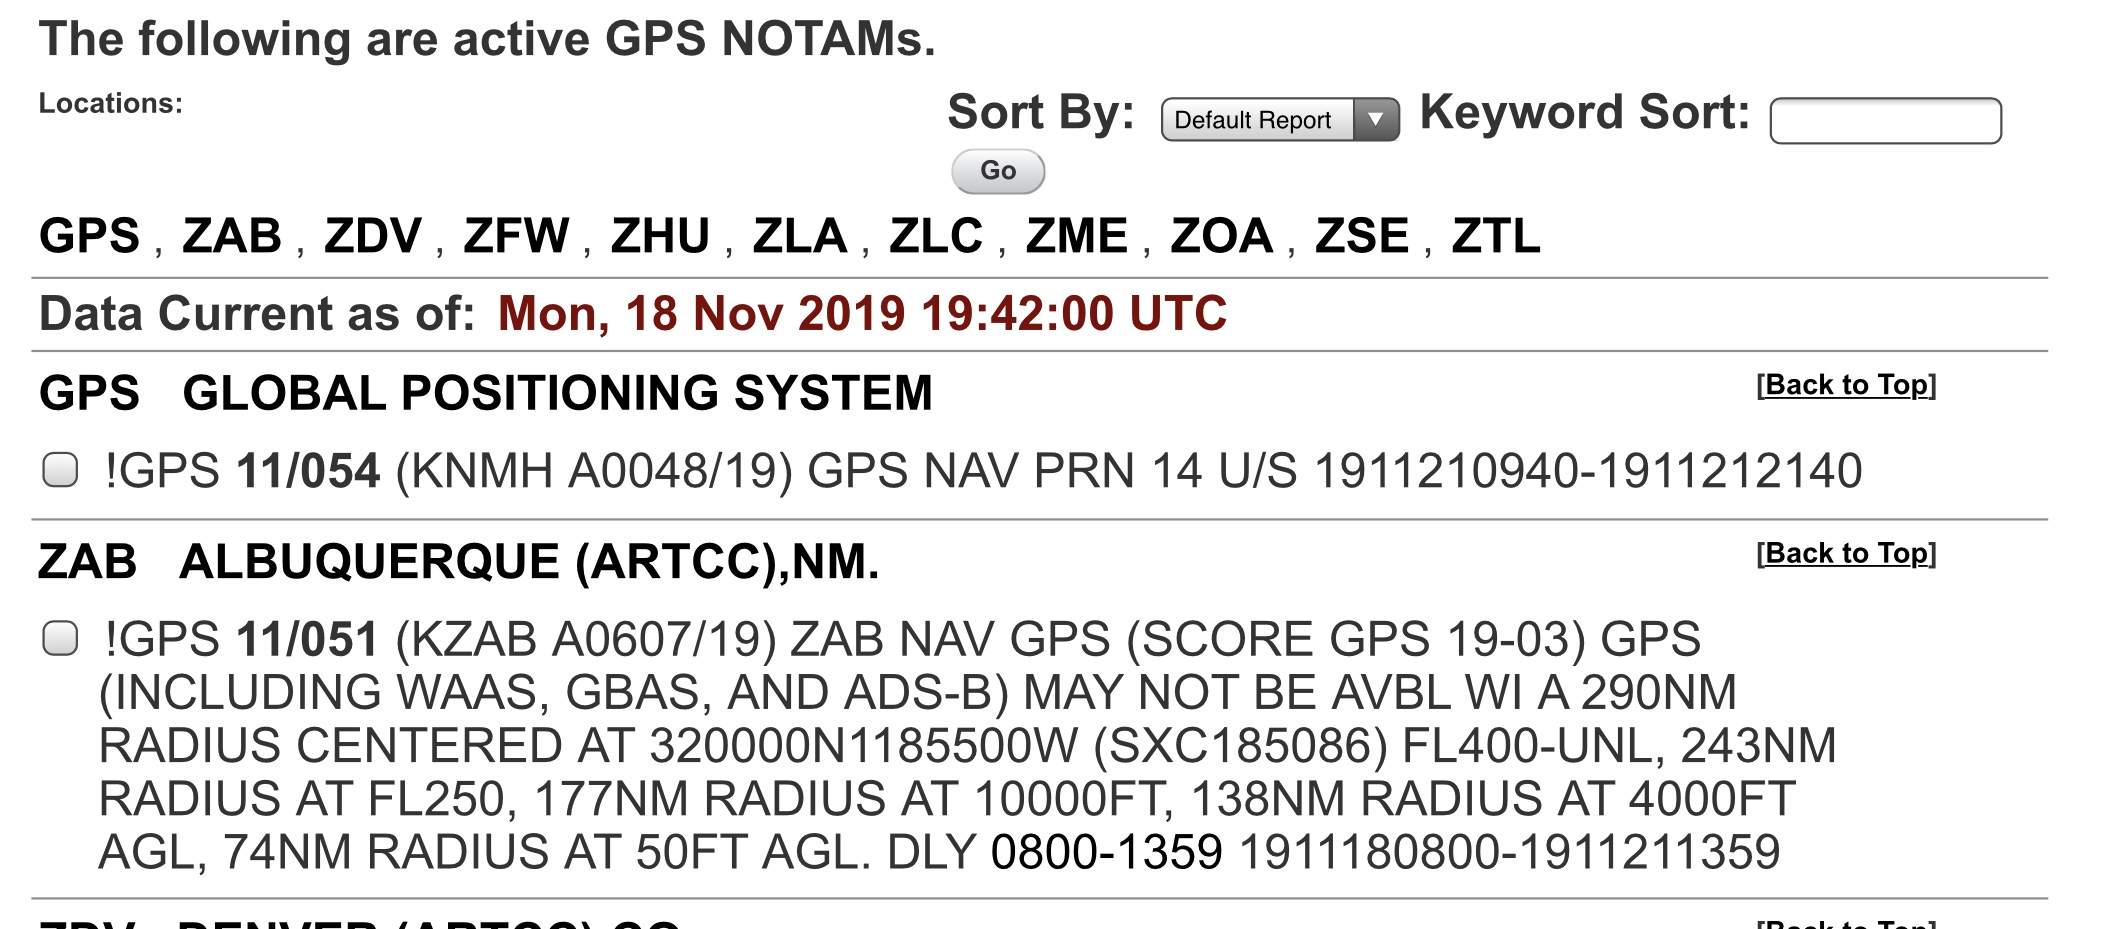 GPS Outage NOTAM Affects GLONASS? Miscellaneous Aviation Talk - Mooneyspace.com - A community for Mooney aircraft owners and enthusiasts